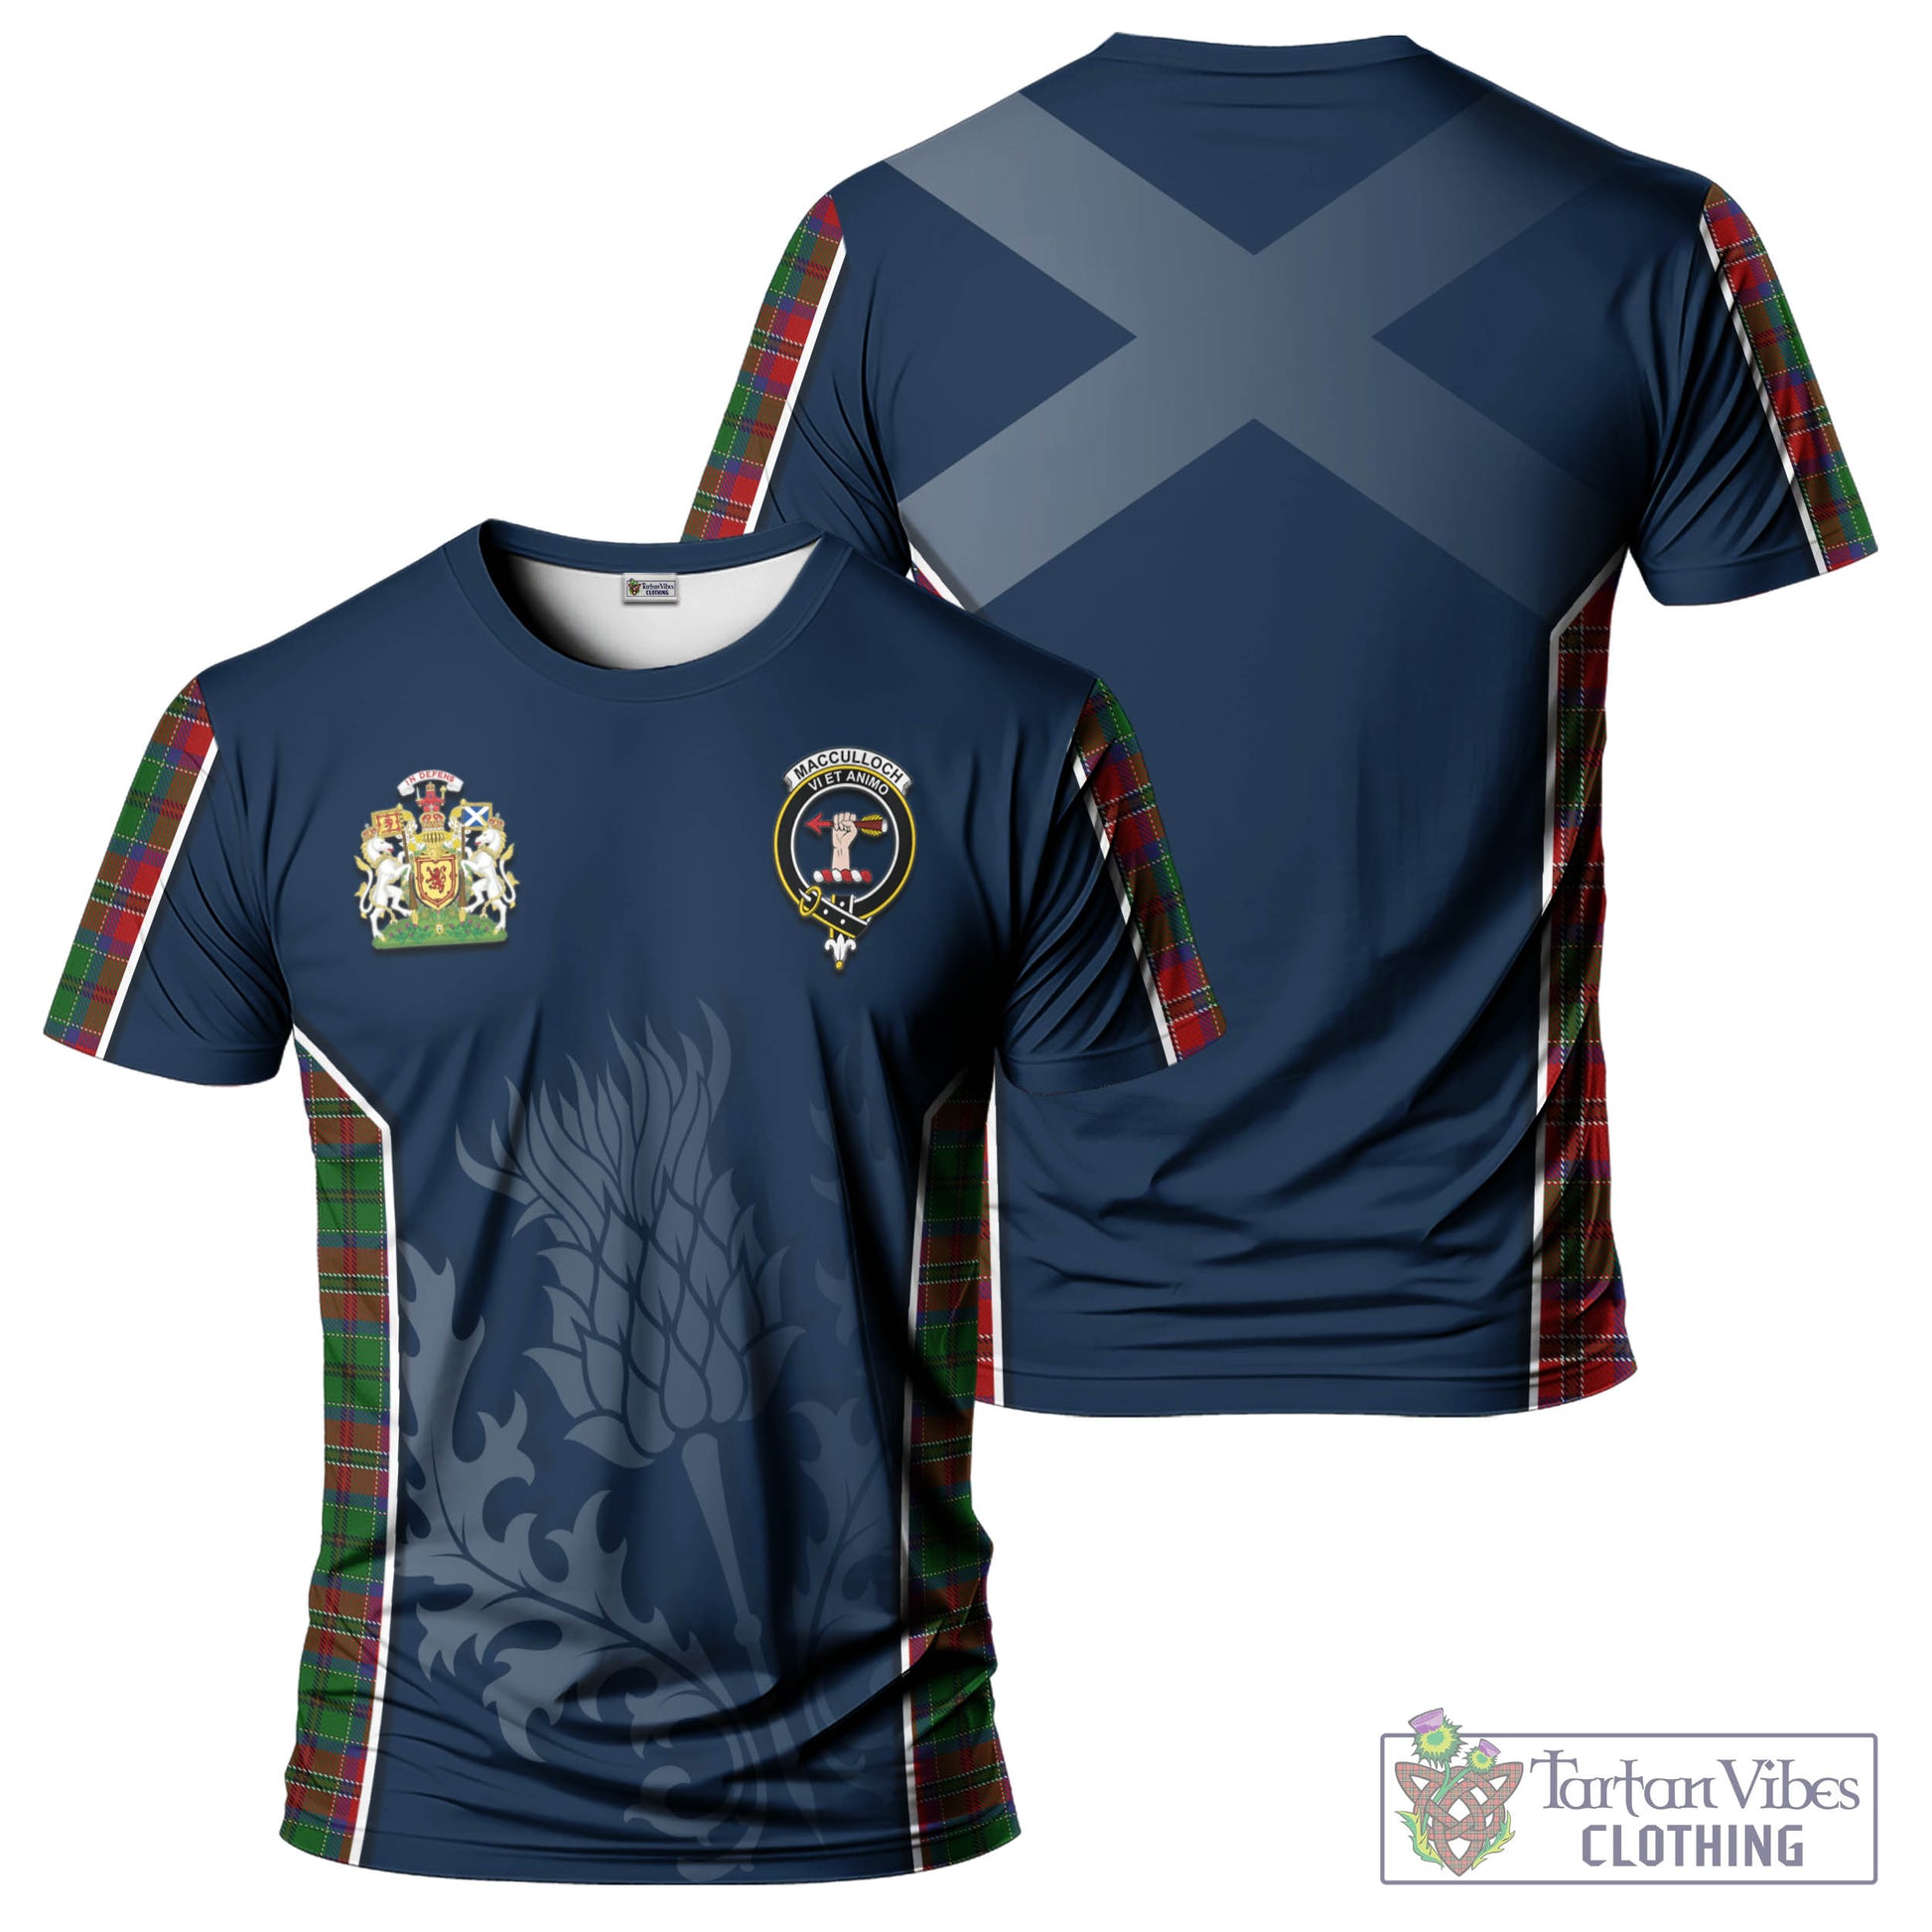 Tartan Vibes Clothing MacCulloch Tartan T-Shirt with Family Crest and Scottish Thistle Vibes Sport Style